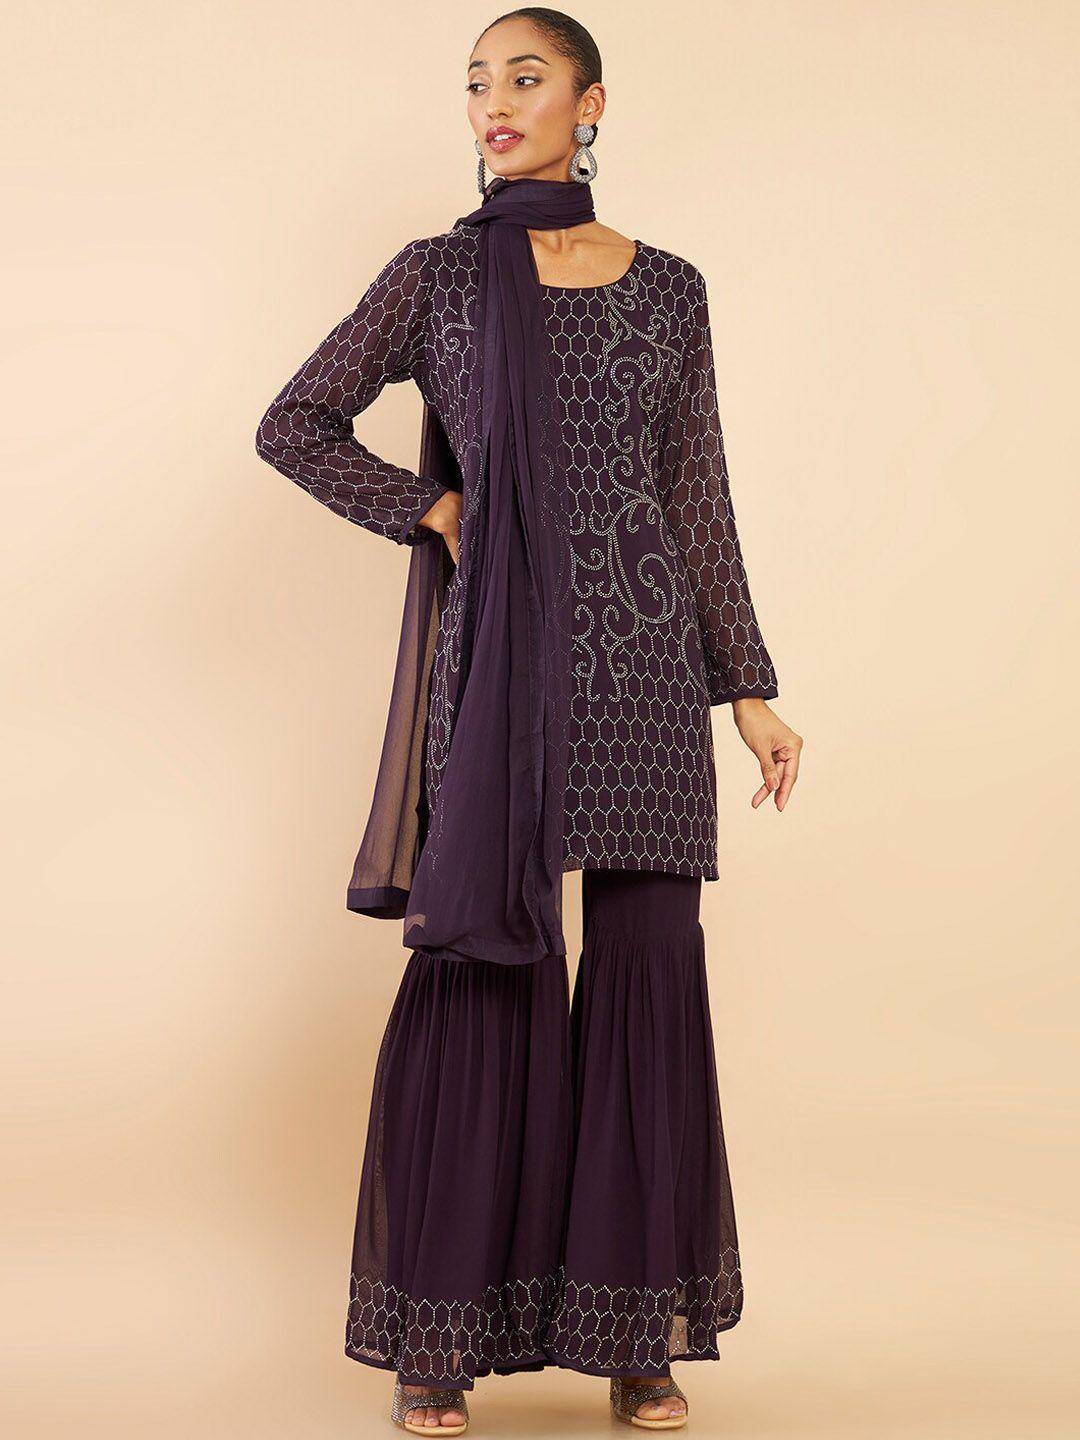 soch-women-purple-floral-embroidered-beads-and-stones-kurta-with-sharara-&-with-dupatta